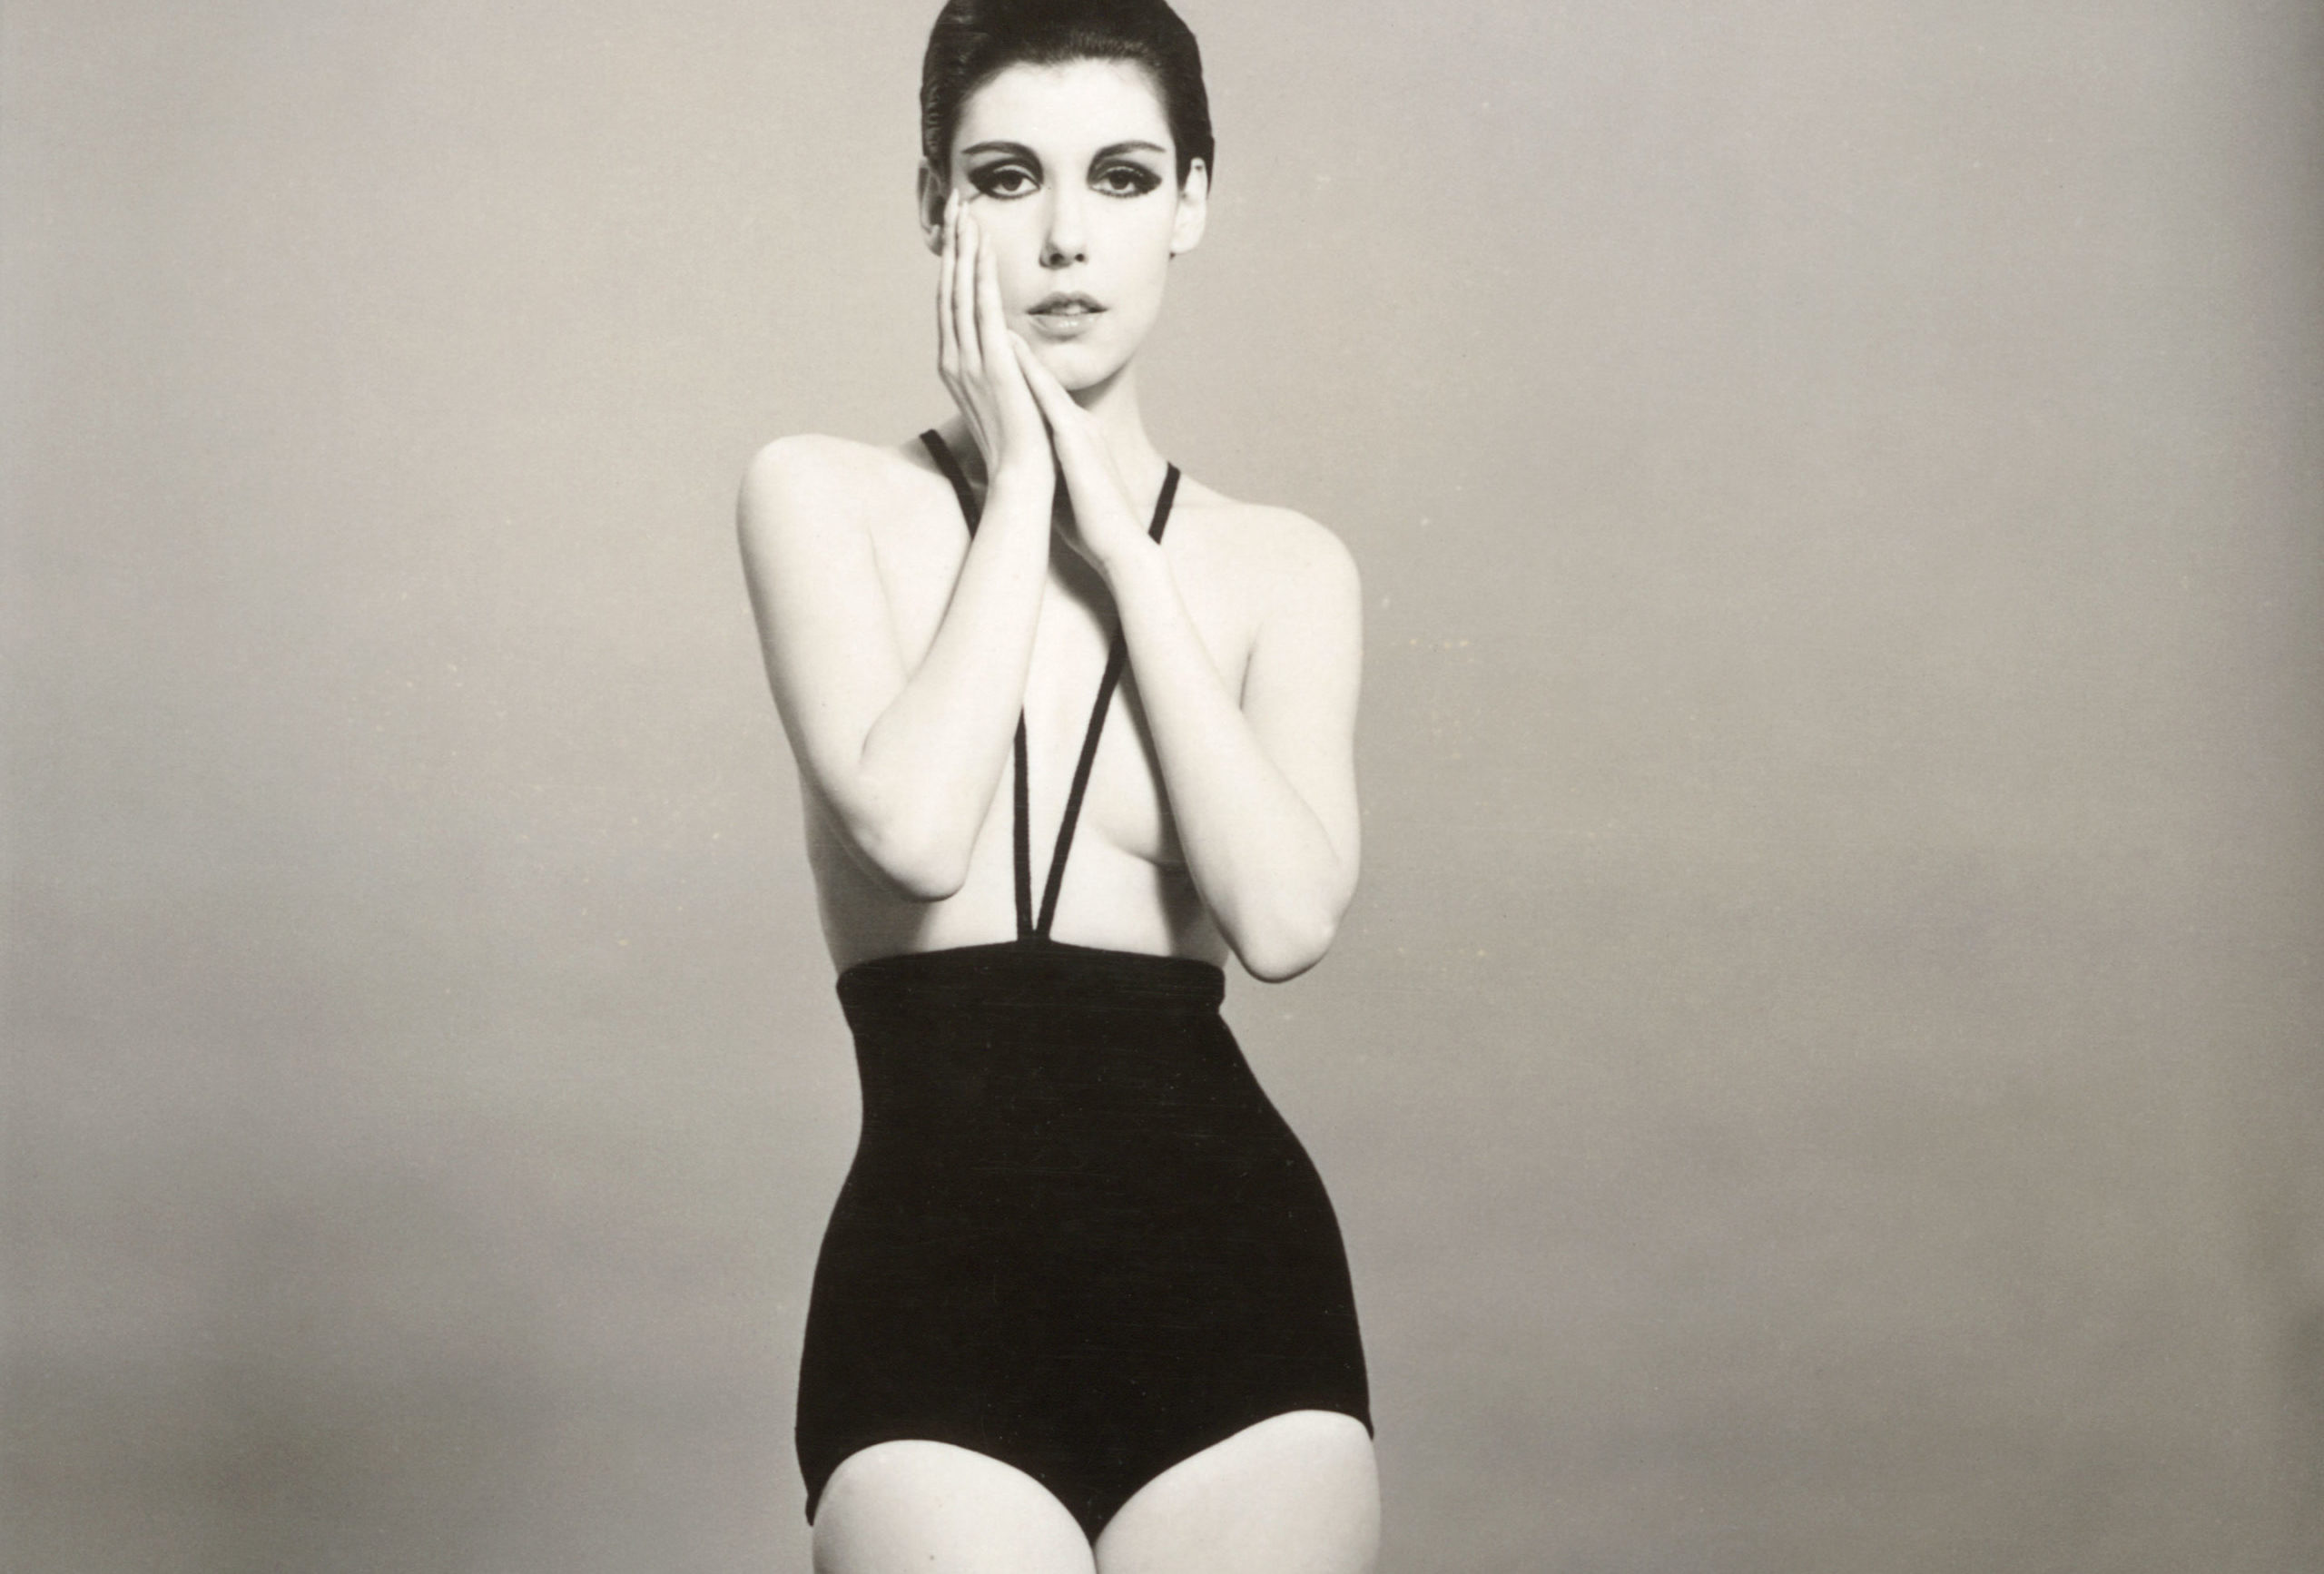 Peggy Moffitt modeling the topless swimsuit designed by Rudi Gernreich, 1964. Photograph © William Claxton, LLC, courtesy of Demont Photo Management & Fahey/Klein Gallery Los Angeles, with permission of the Rudi Gernreich trademark.